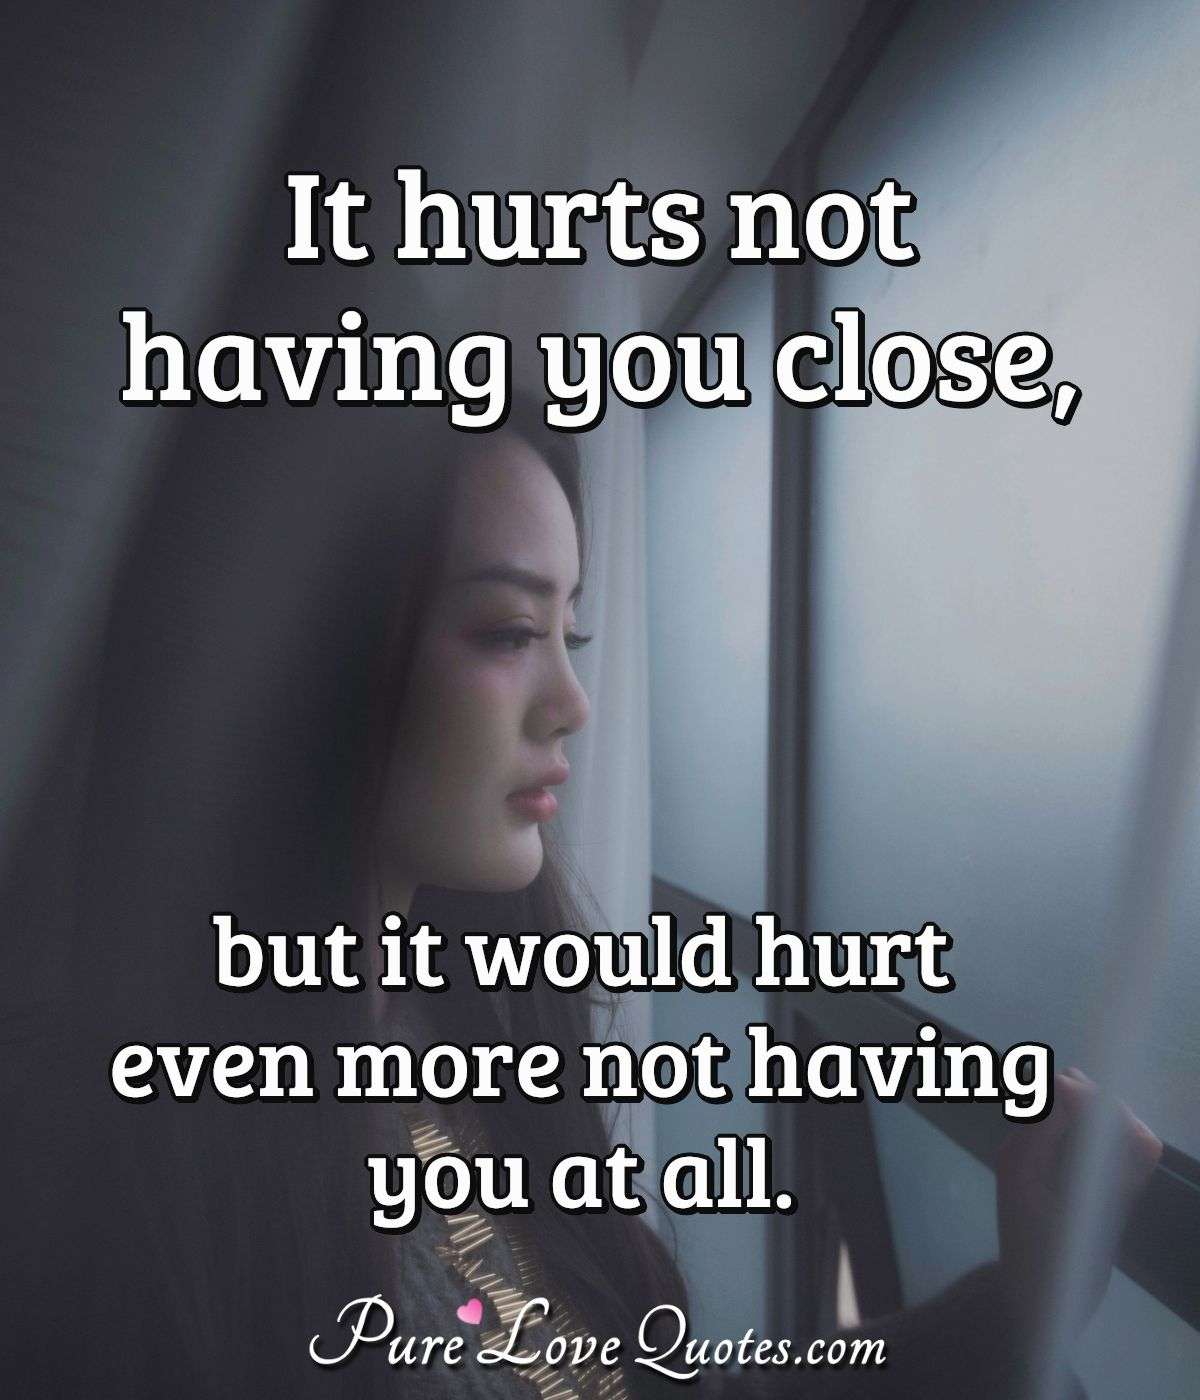 It hurts not having you close, but it would hurt even more not having you at all. - Anonymous